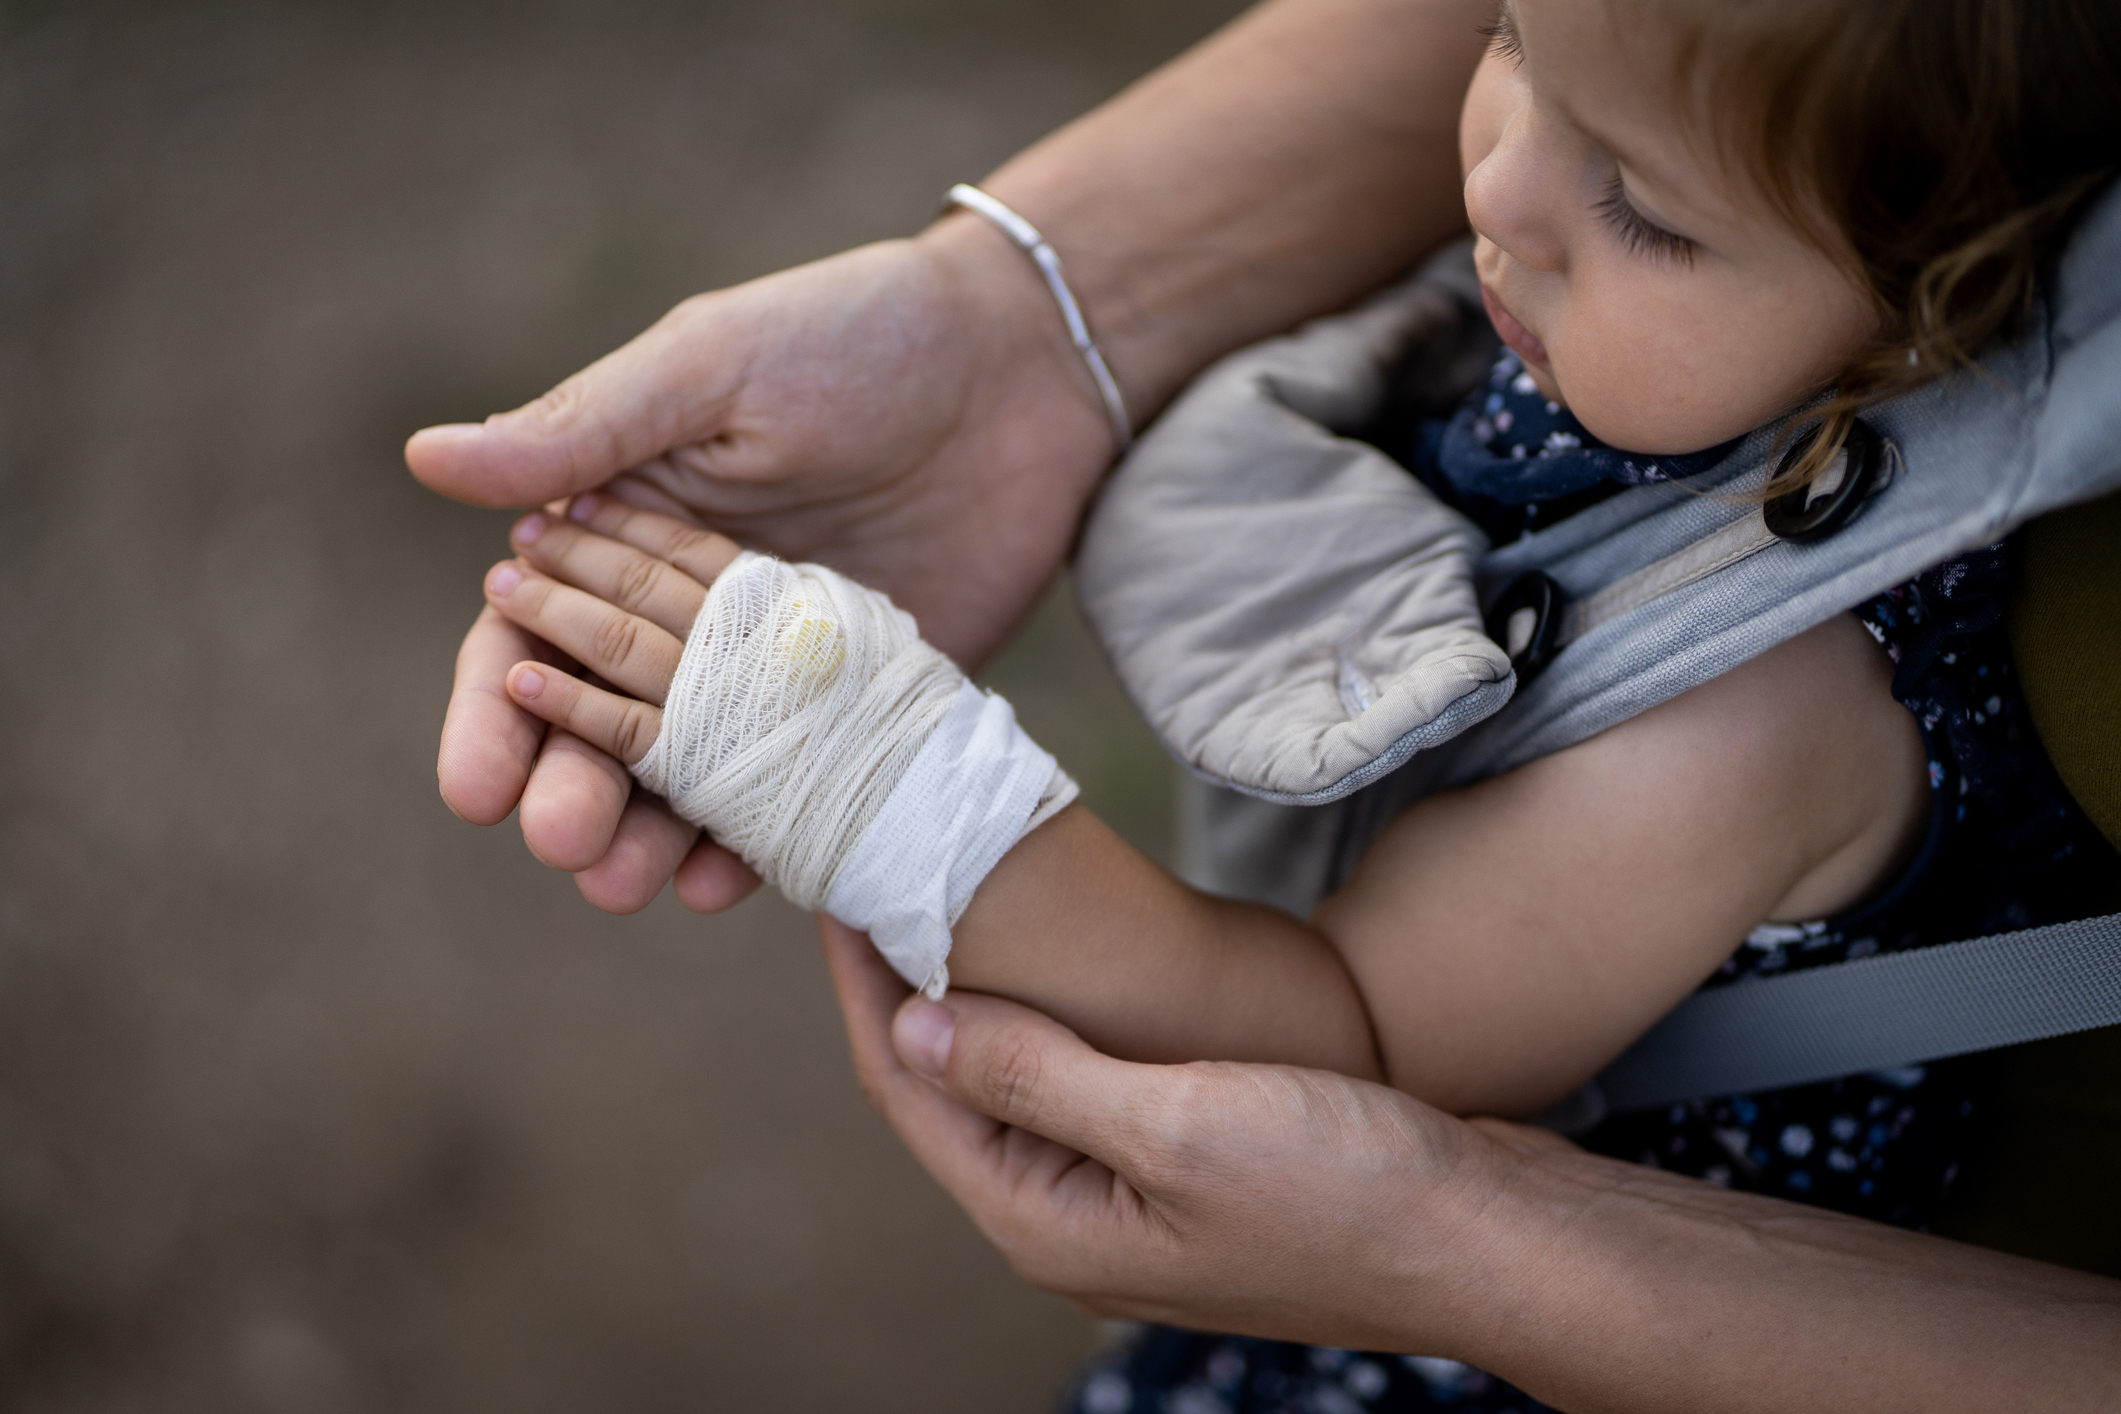 Toddler with applied bandage on arm